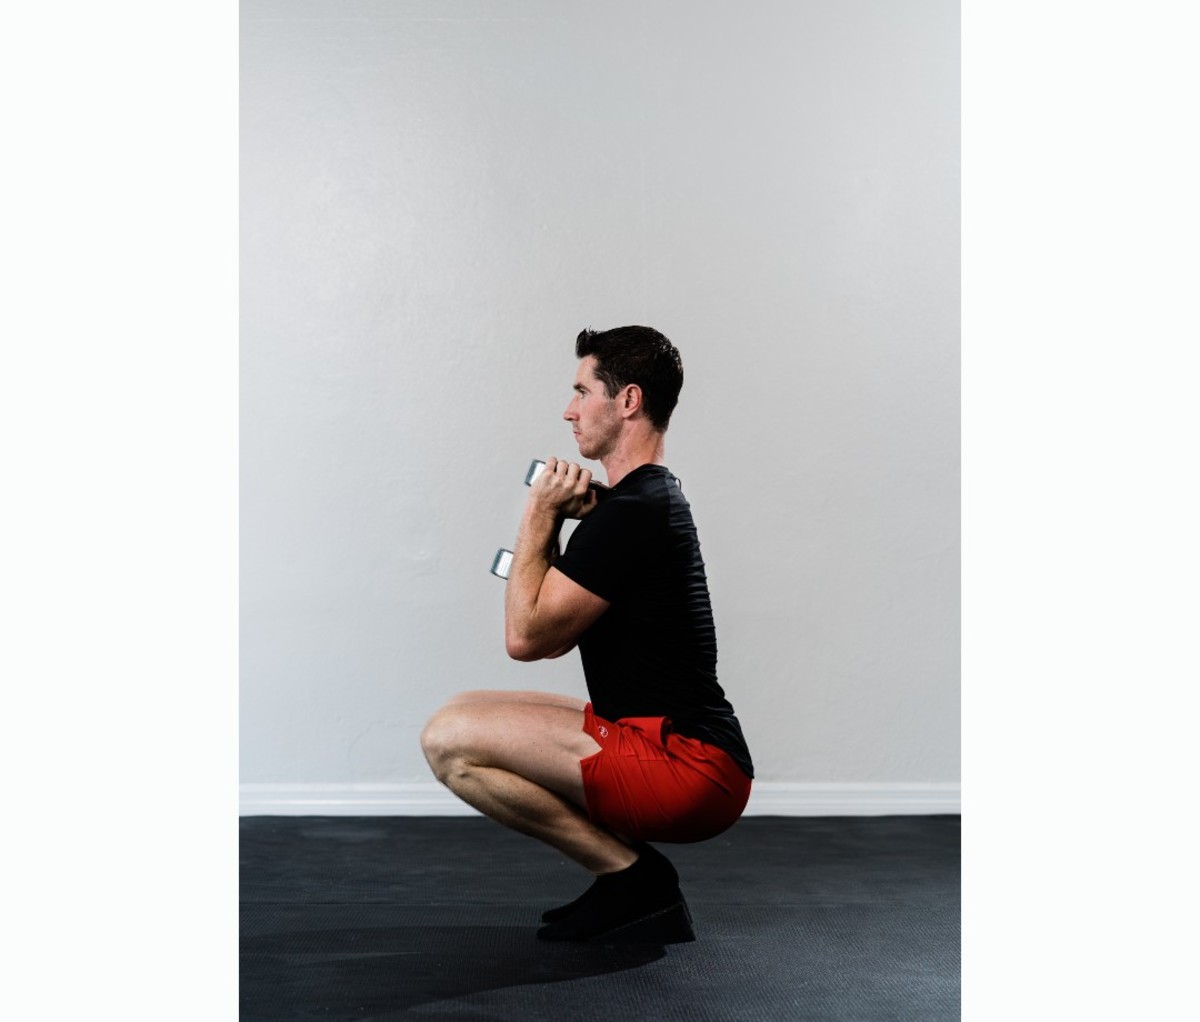 Caucasian man in black t-shirt and red shorts doing squats with dumbbells